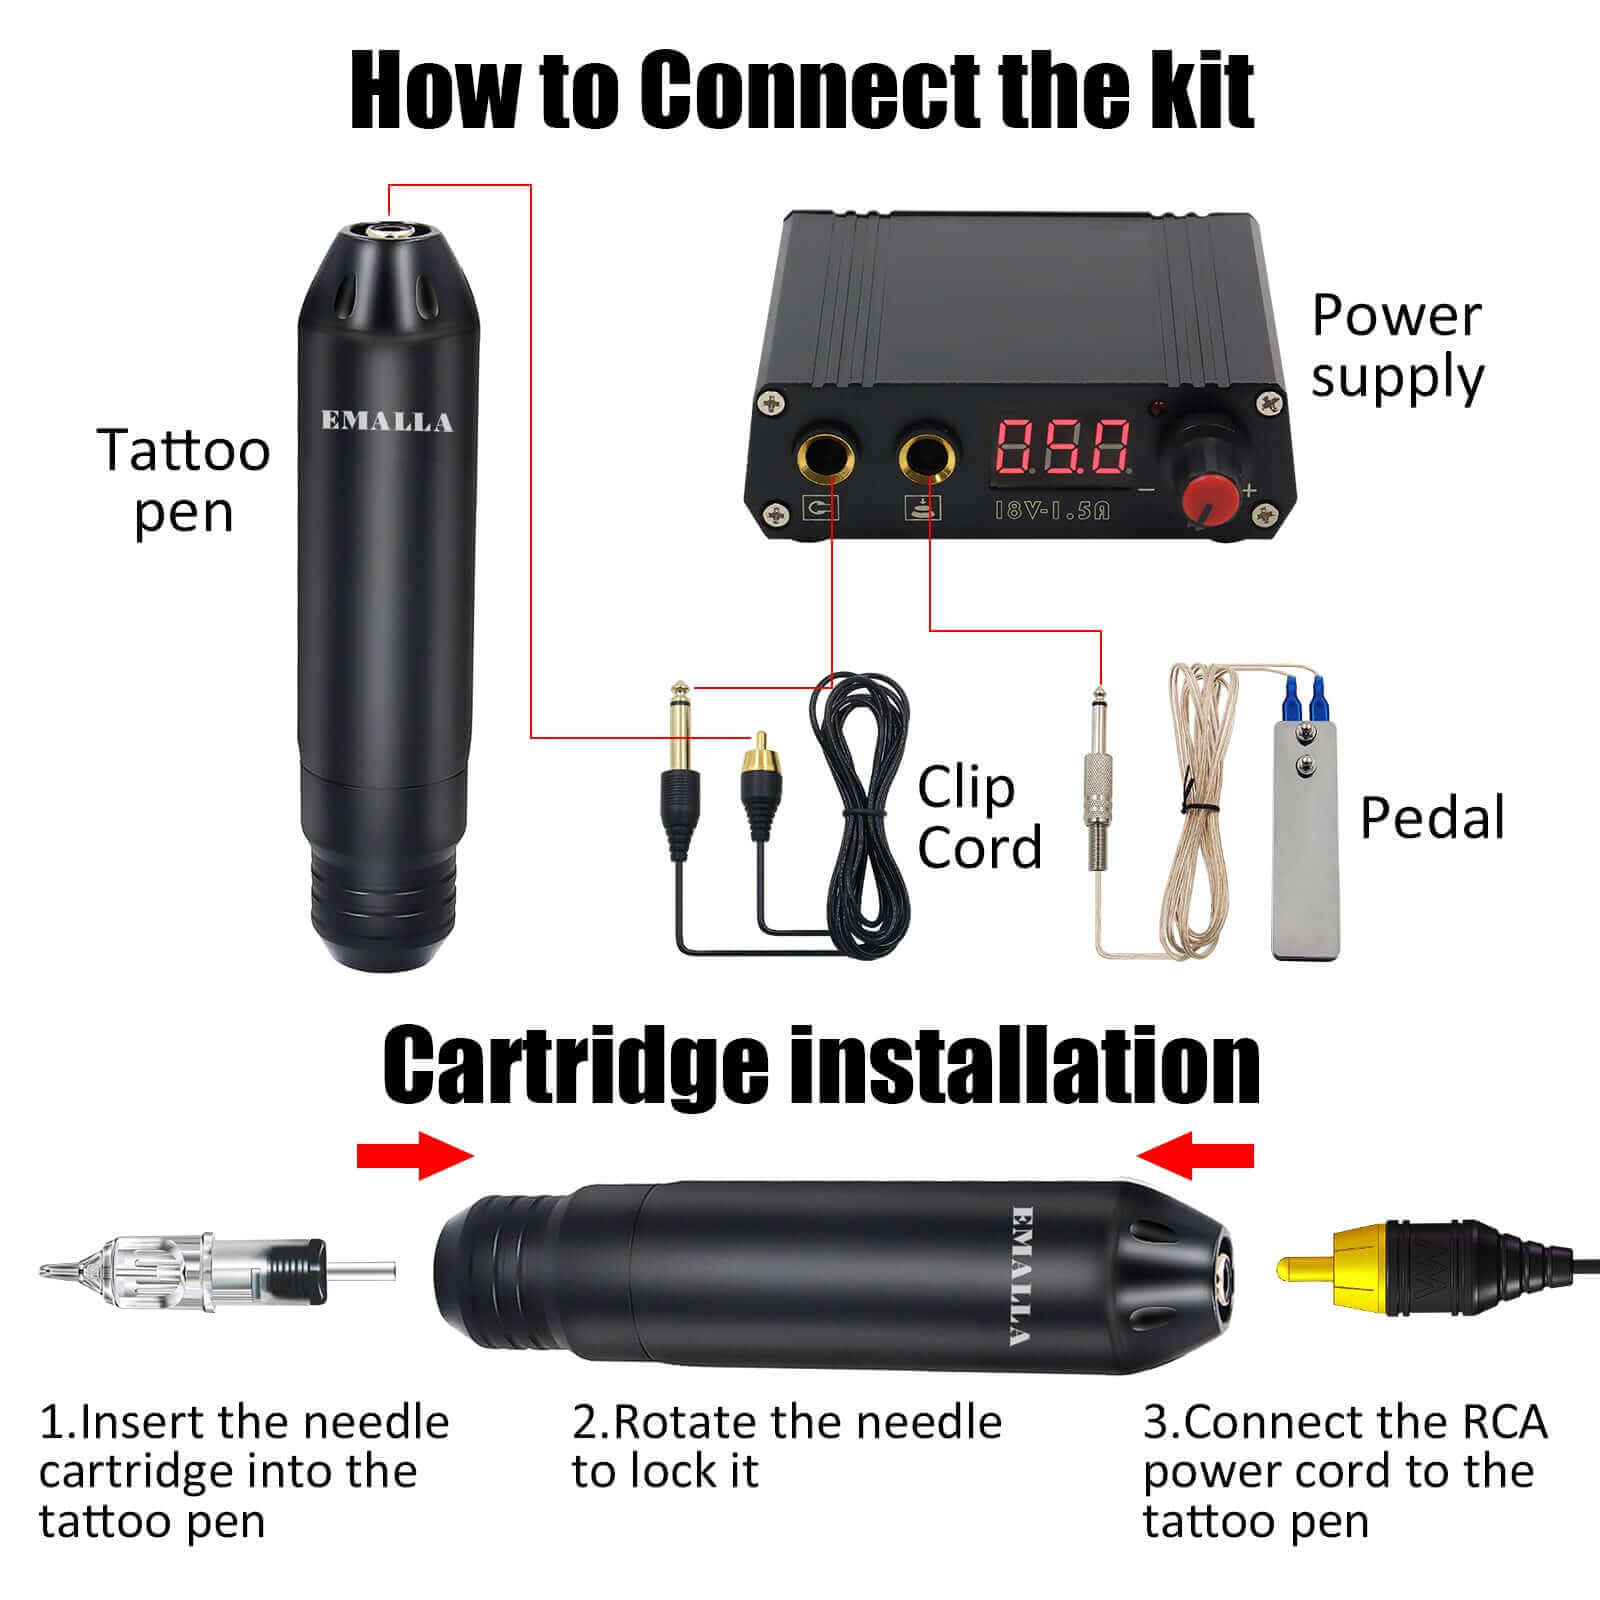 Steps of connecting the kit and cartridge installation of EMALLA tattoo machine with specific illustration